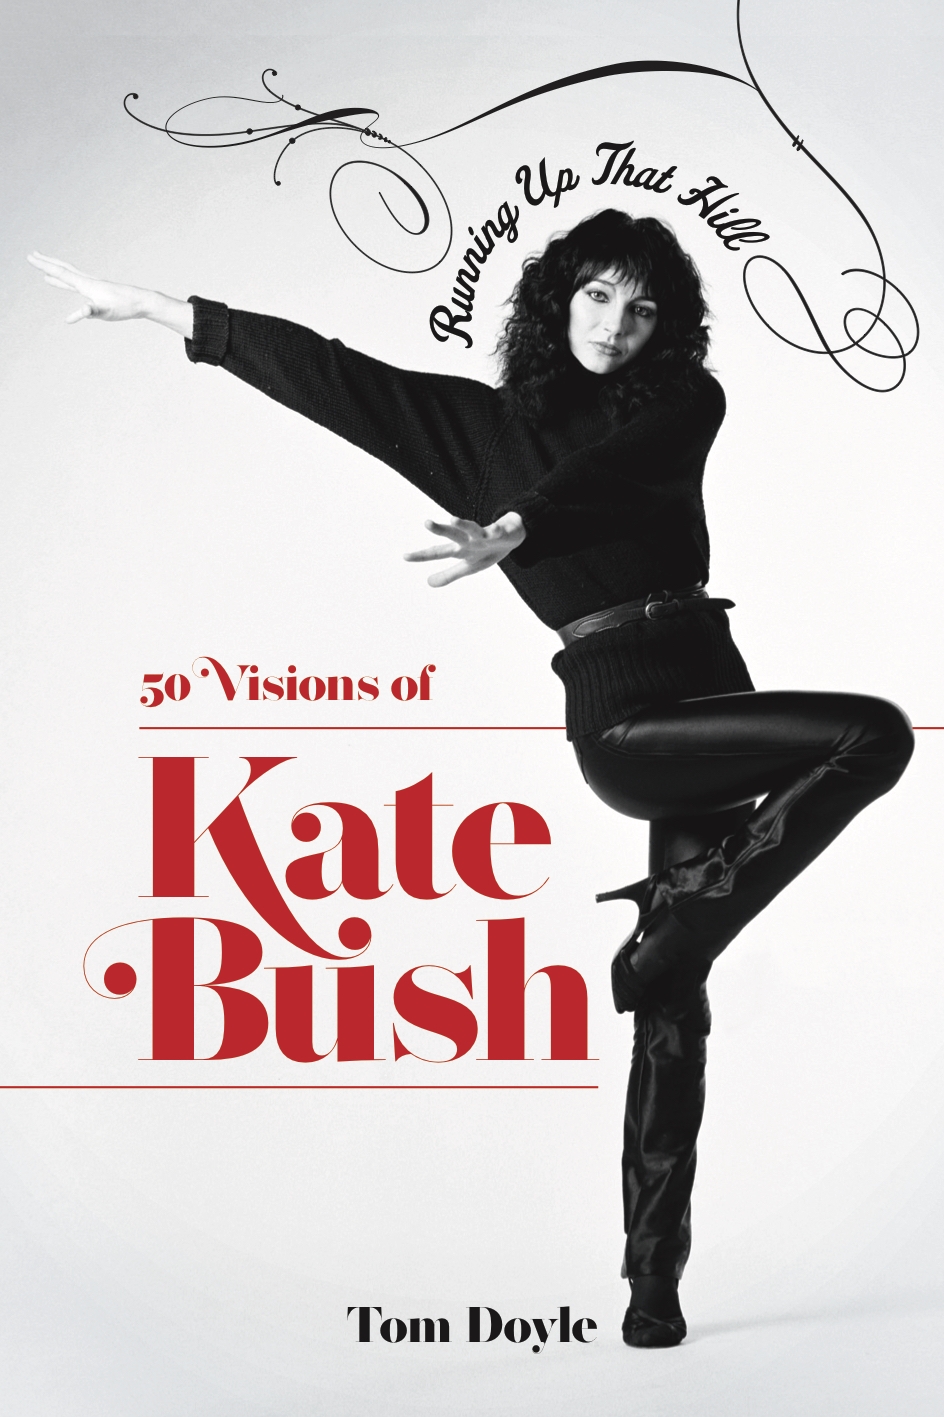 Album artwork for Album artwork for Running Up That Hill: 50 Visions of Kate Bush by Tom Doyle by Running Up That Hill: 50 Visions of Kate Bush - Tom Doyle